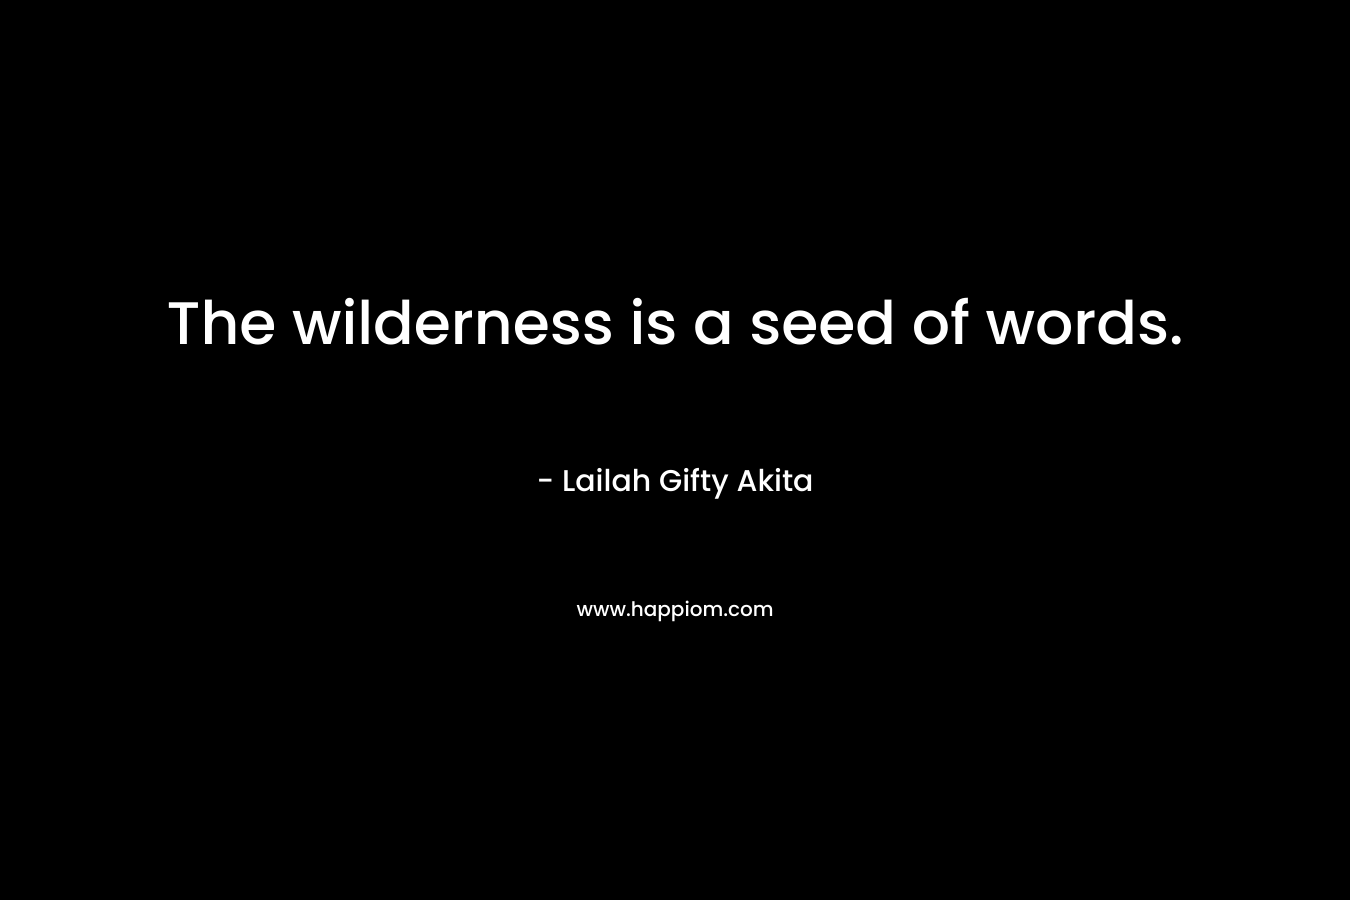 The wilderness is a seed of words.